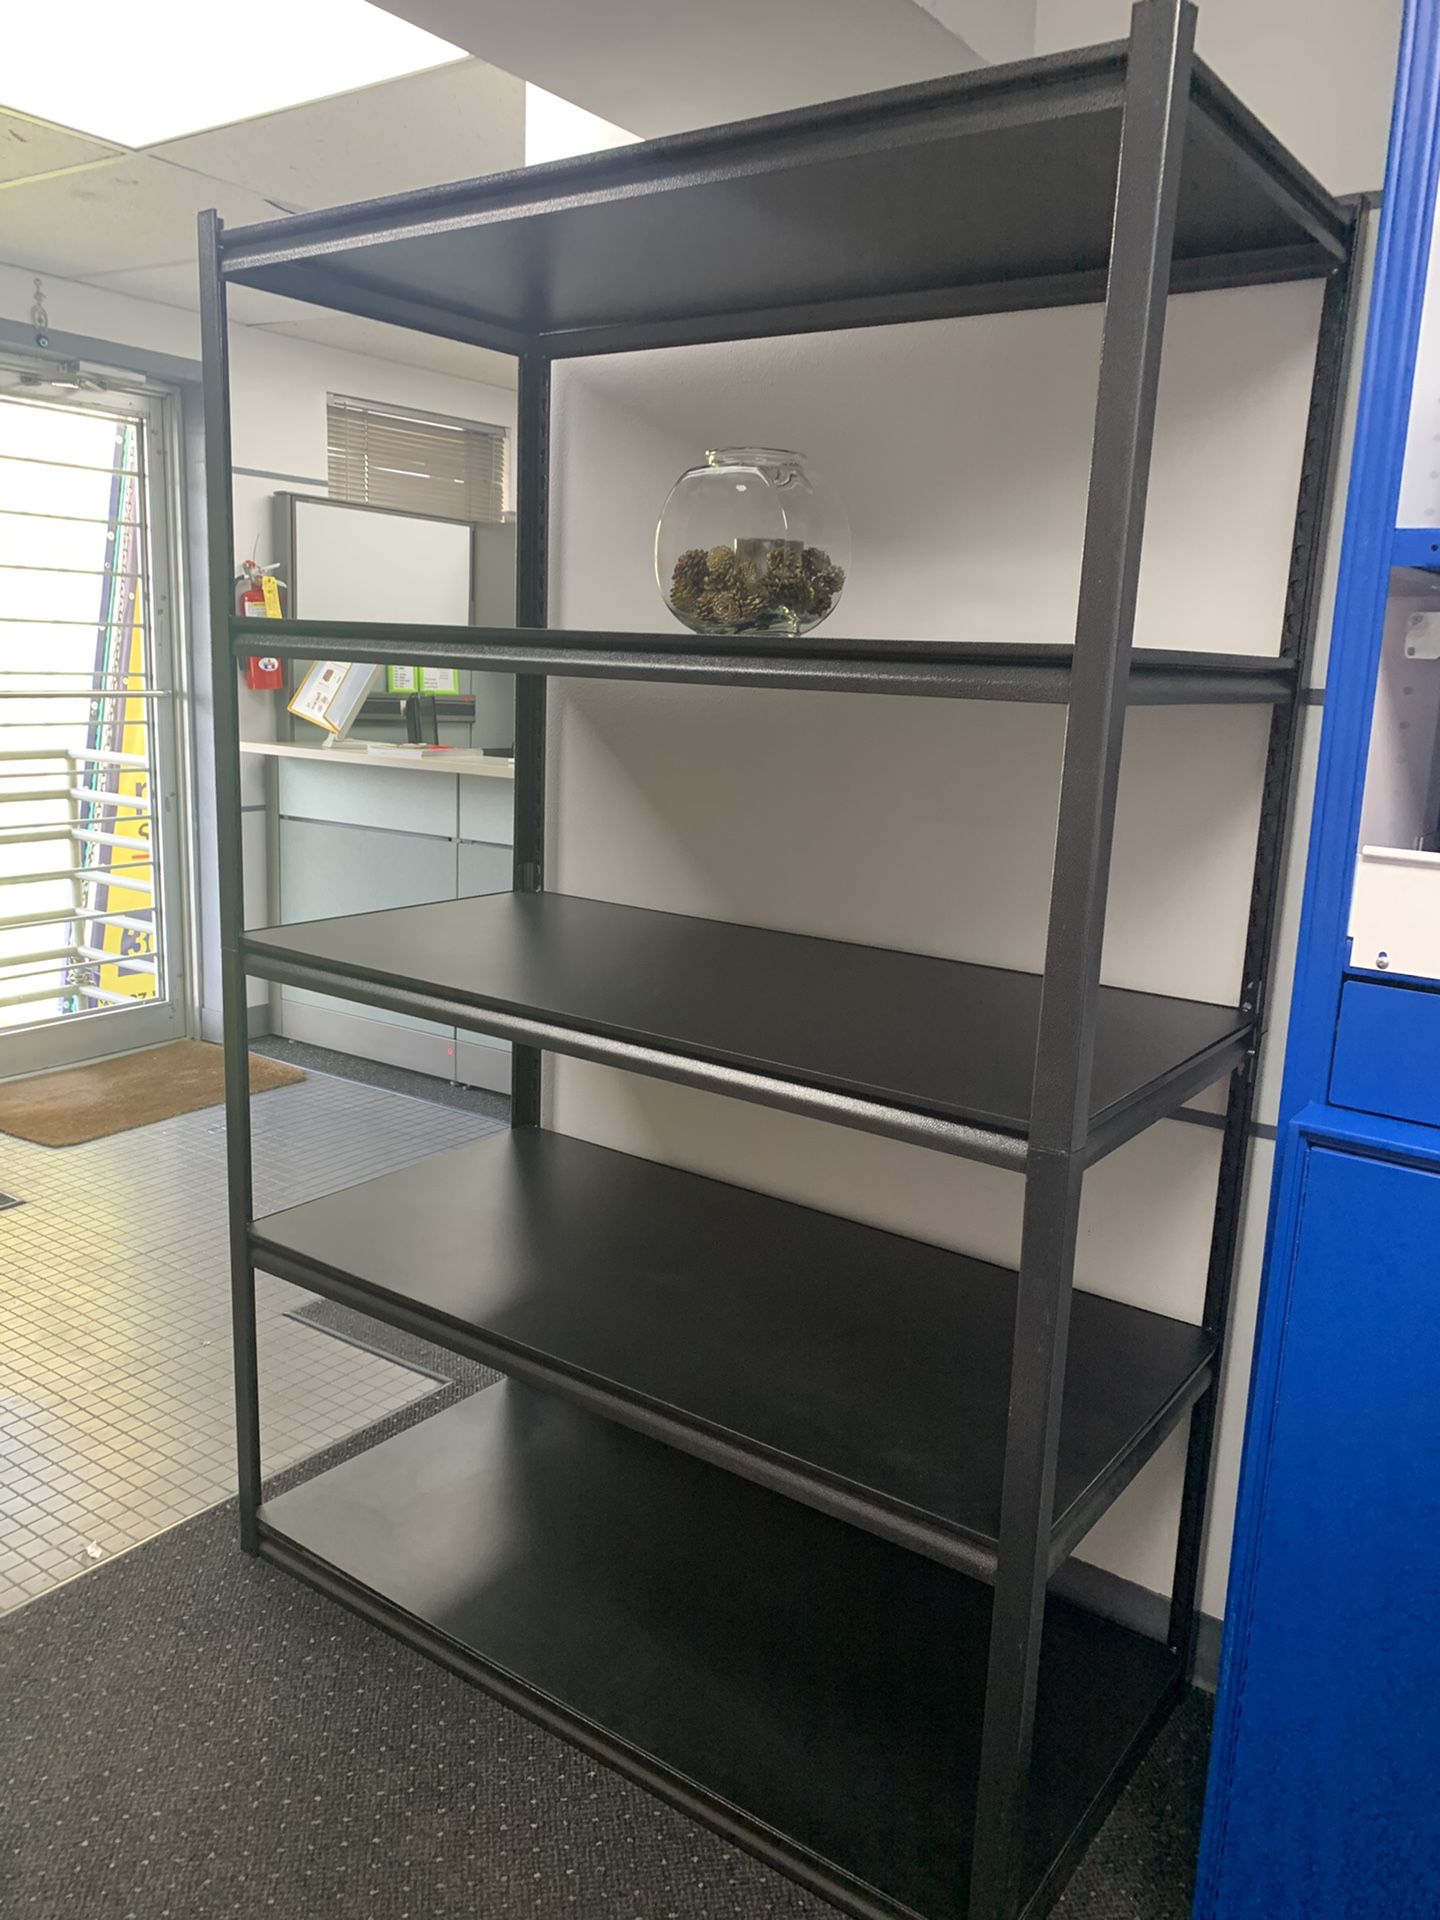 Shelves and storage